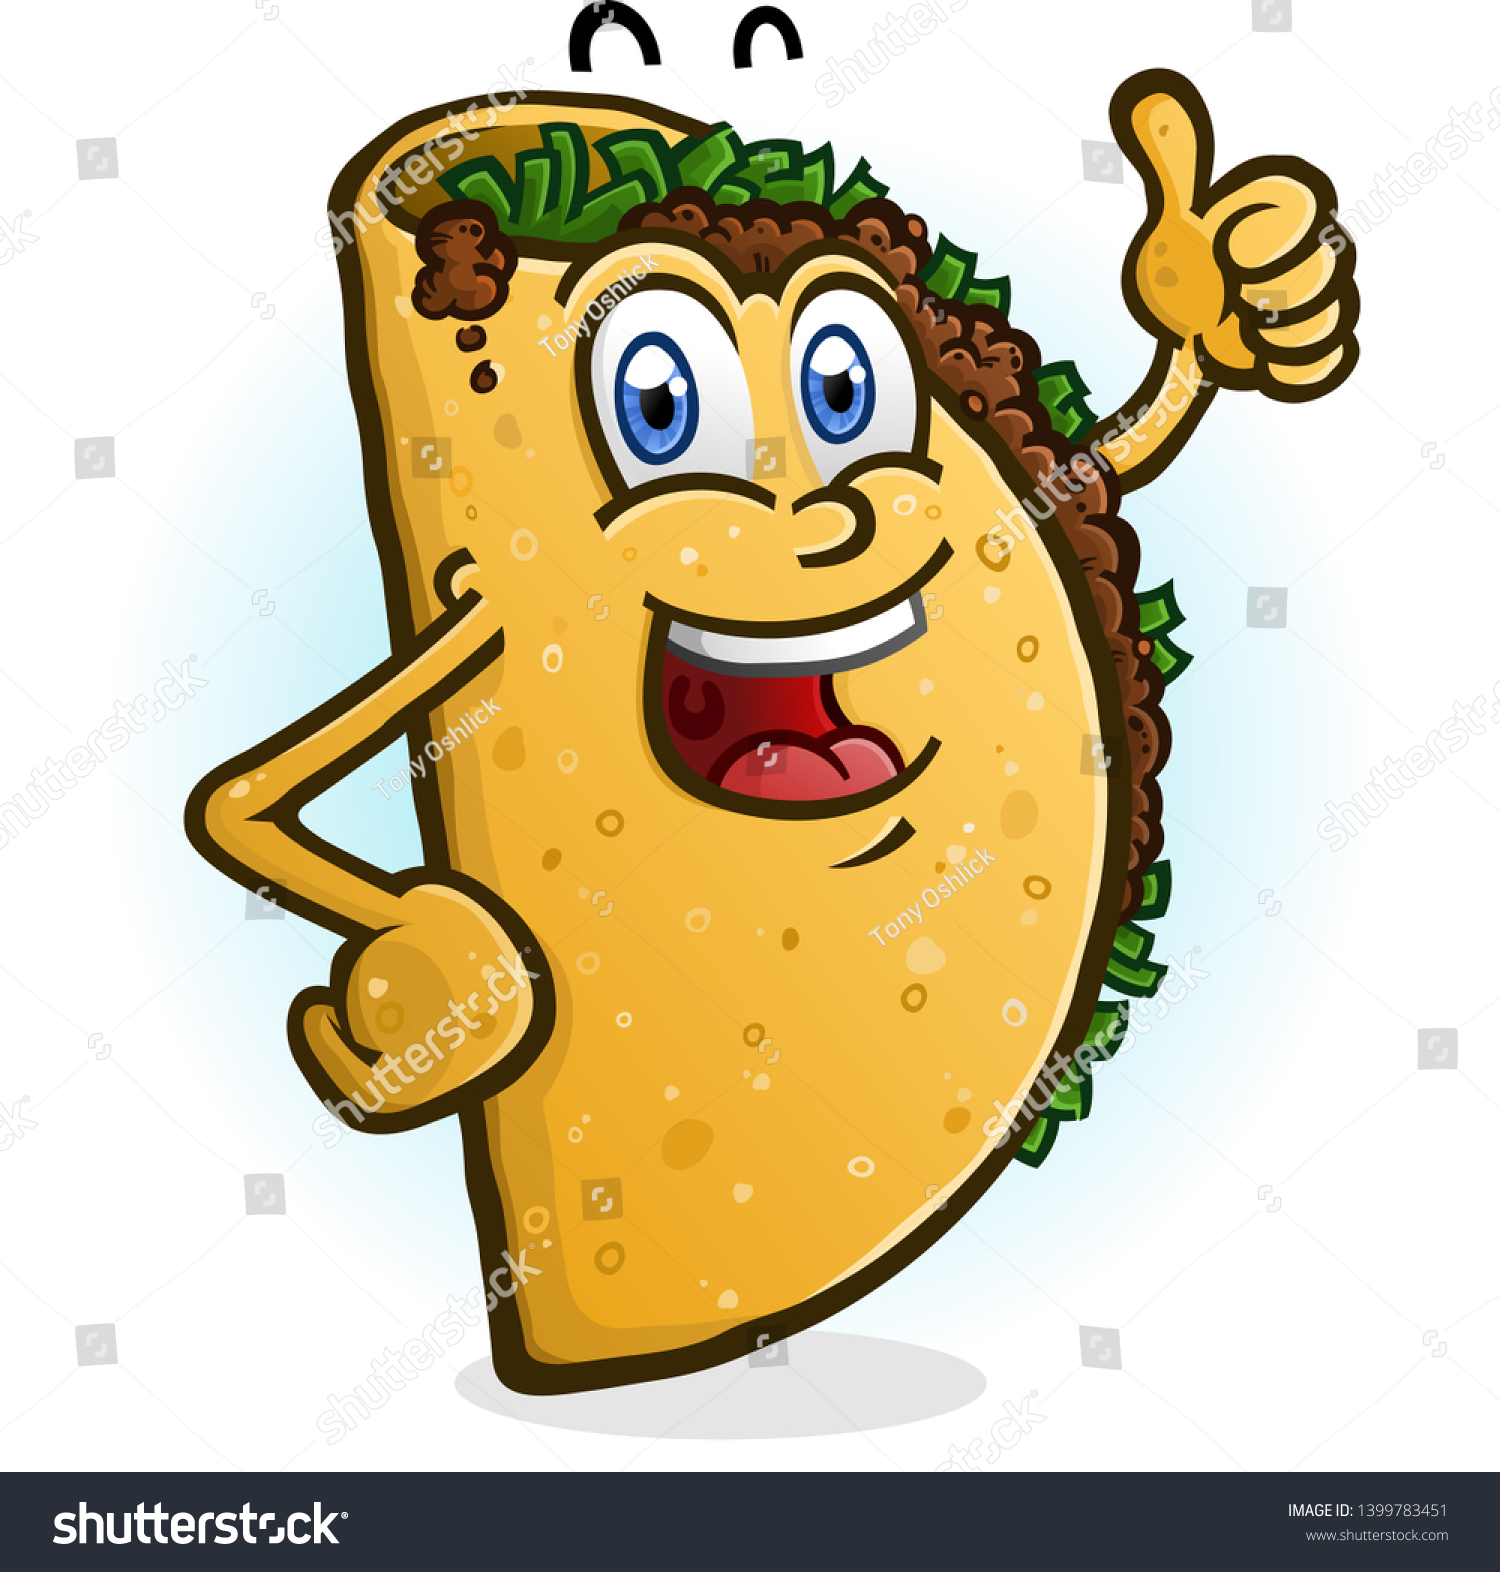 SVG of A happy smiling Taco cartoon character giving an enthusiastic thumbs up gesture svg